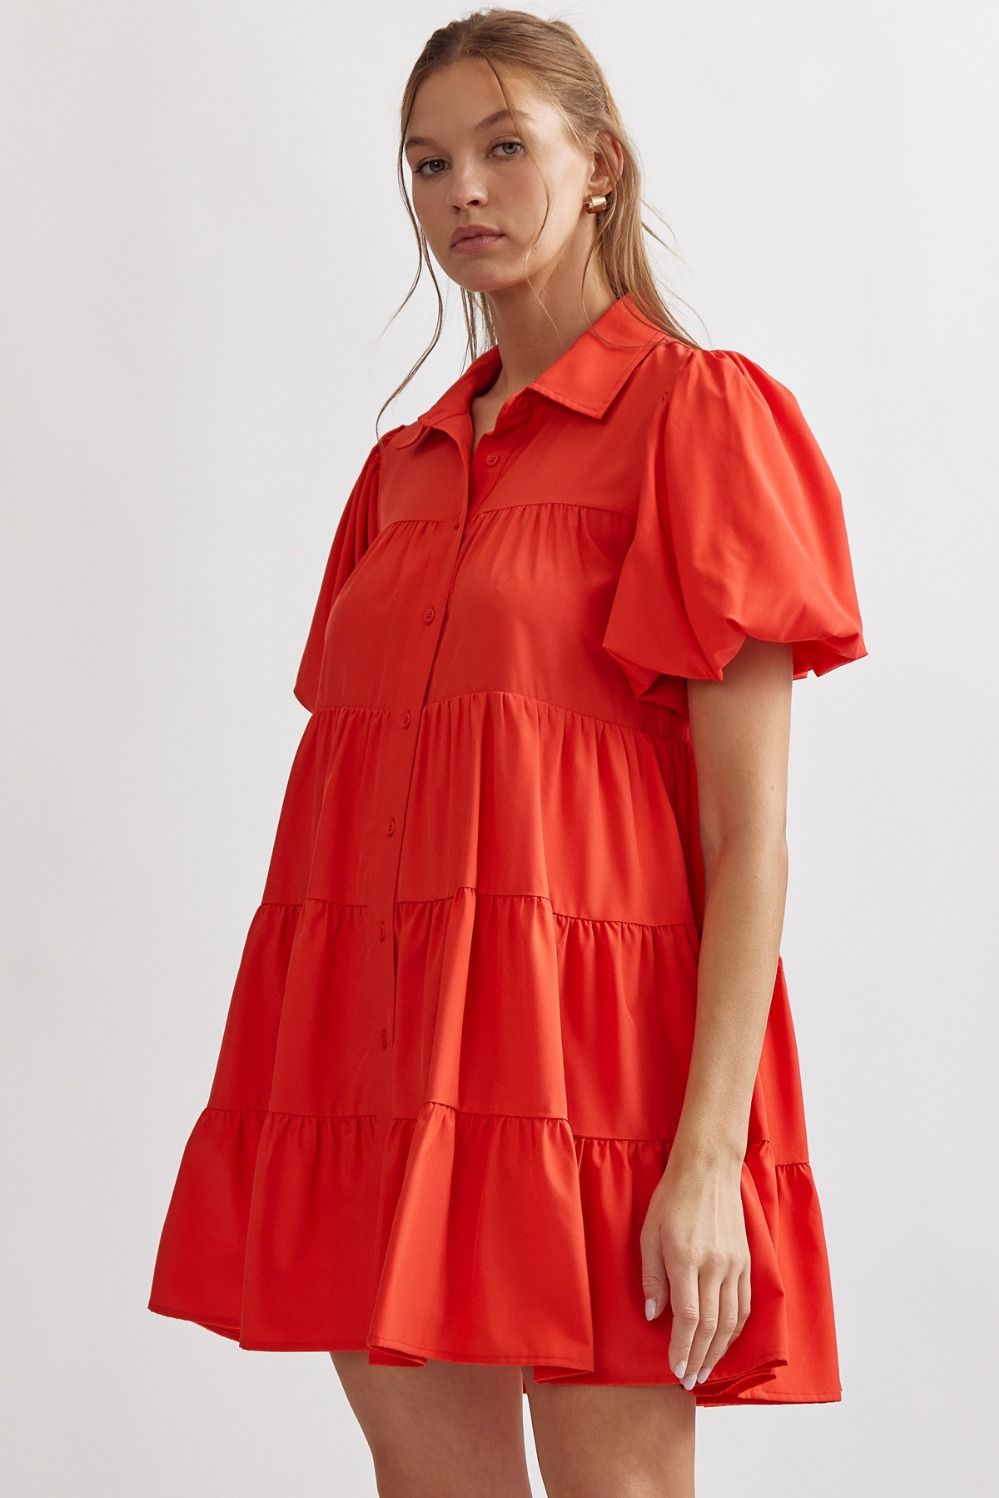 ENTRO INC Women's Dresses RED / S Short Sleeve Button Up Dress || David's Clothing D21143